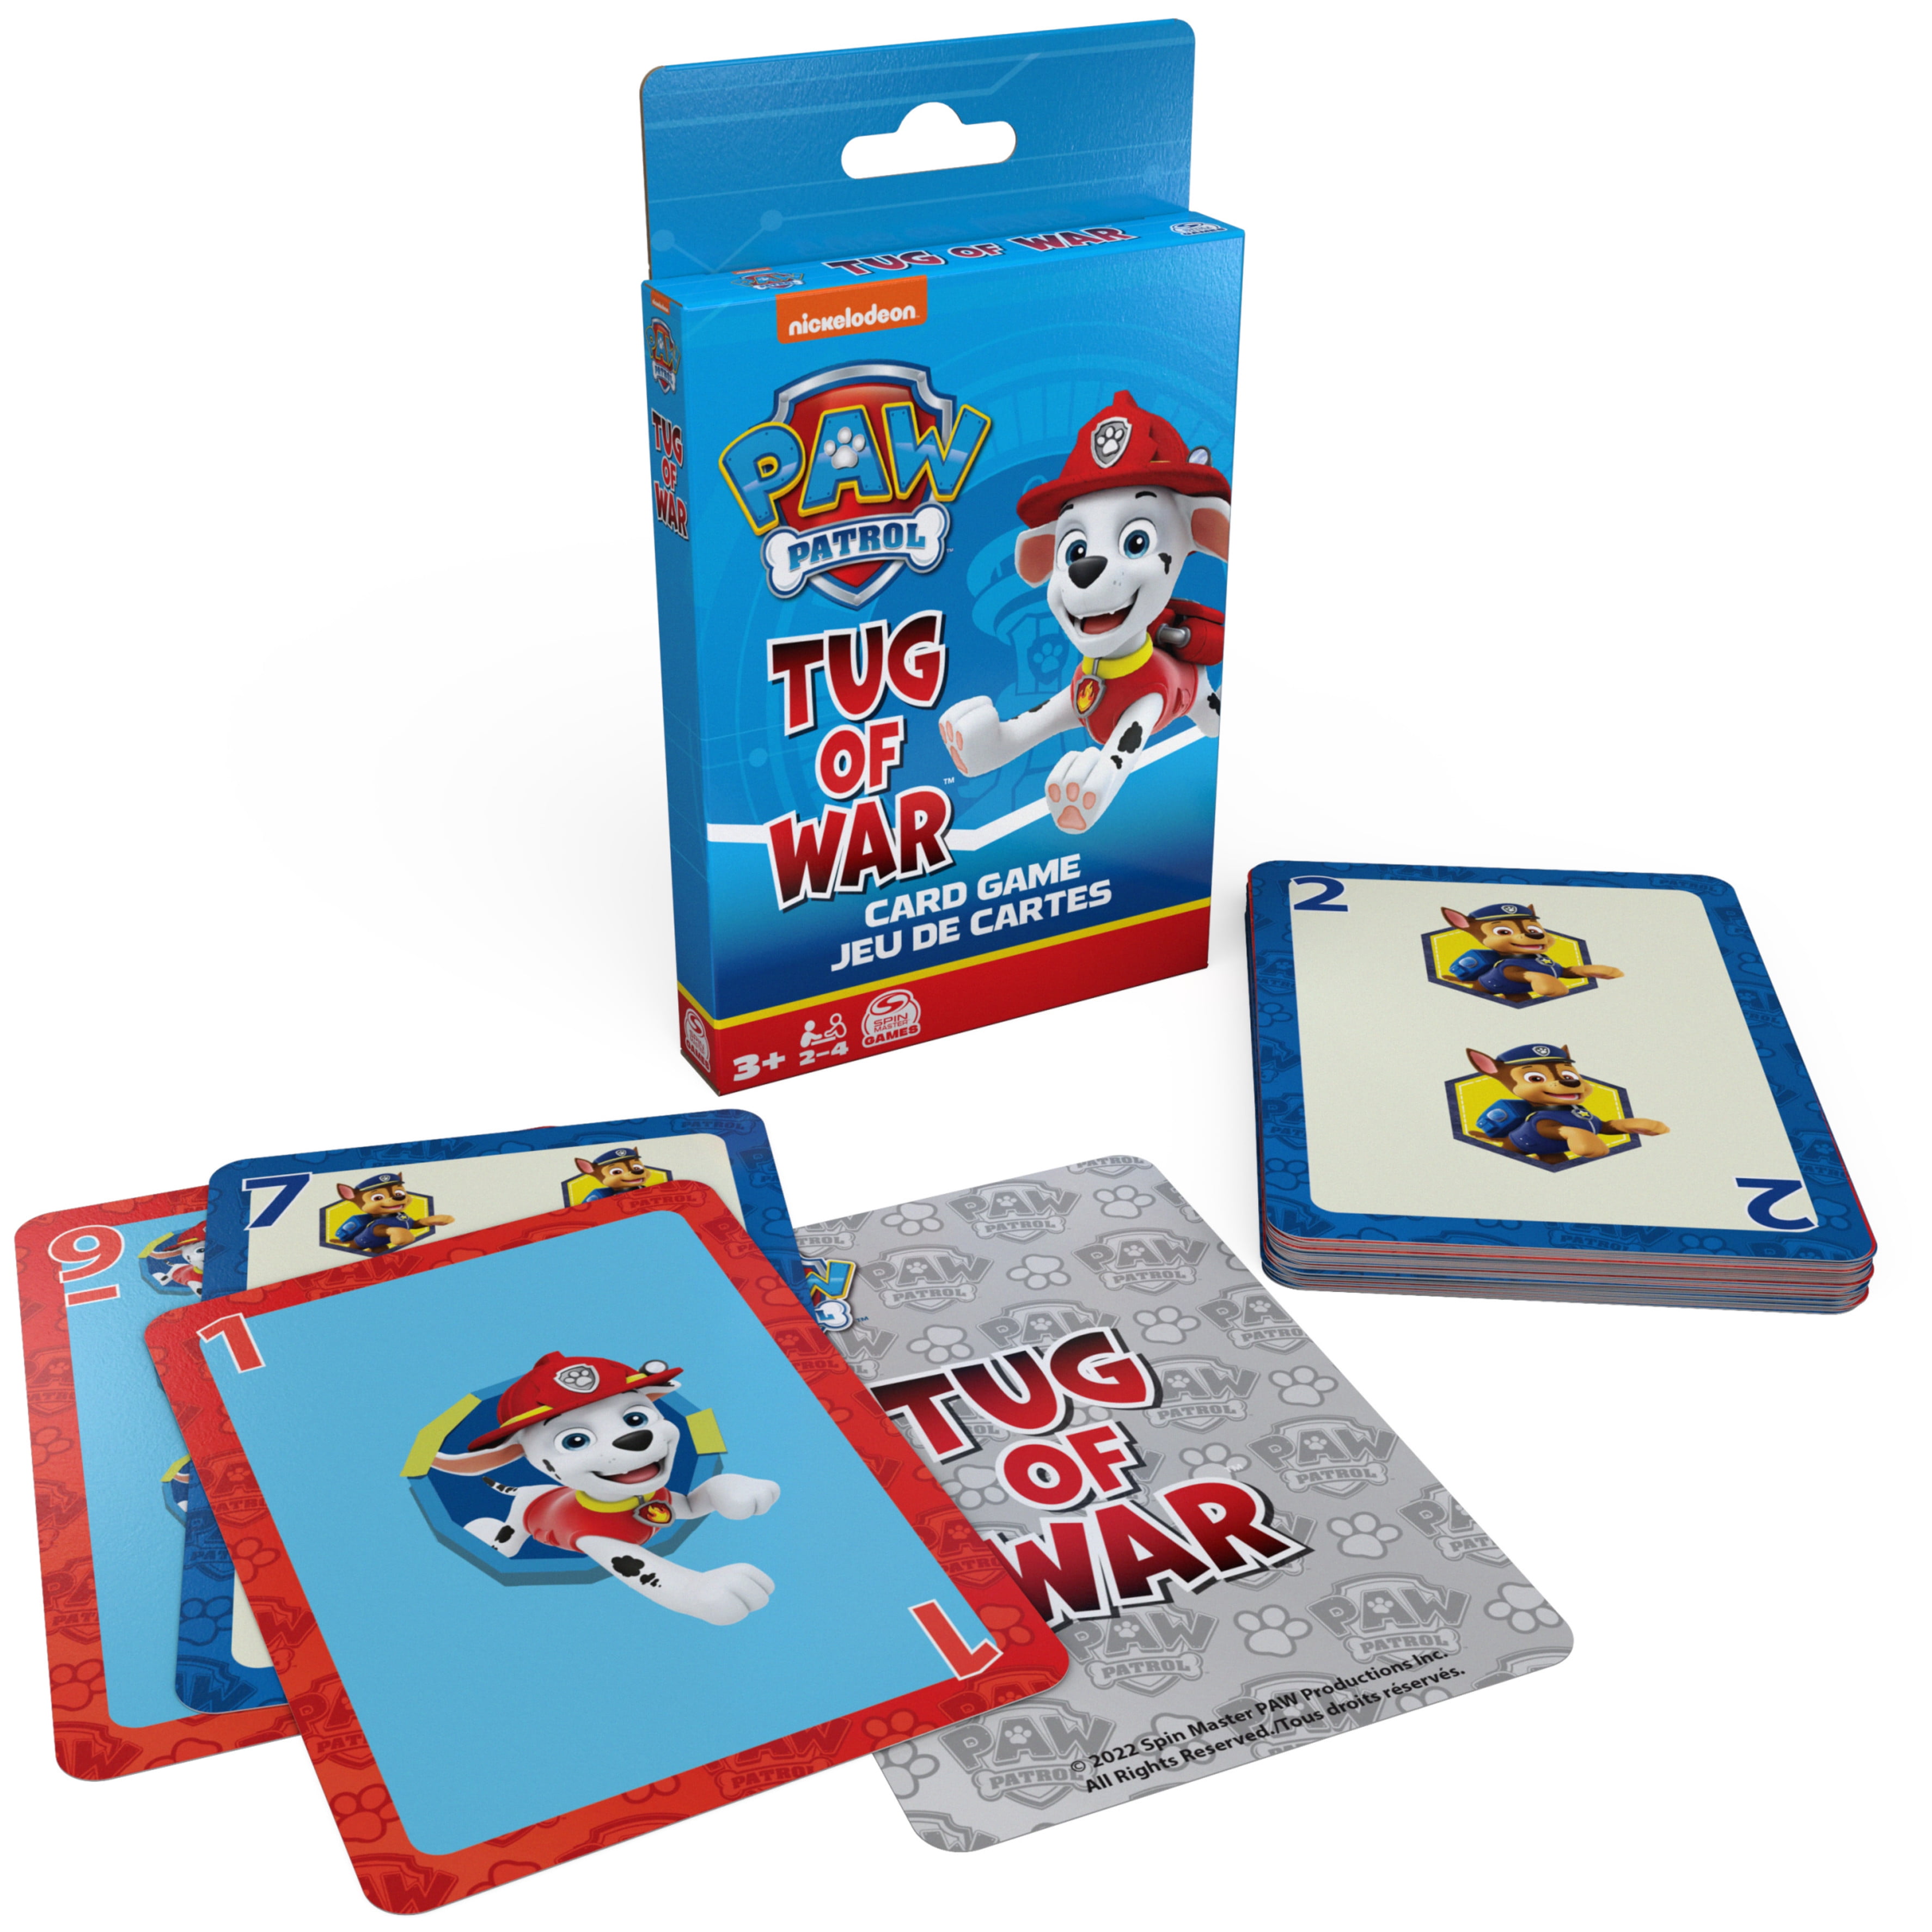  PAW Patrol, Games HQ Board Games for Kids Checkers Tic Tac Toe  Memory Match Bingo Go Fish Card Games PAW Patrol Toys, for Preschoolers  Ages 4 and up : Everything Else